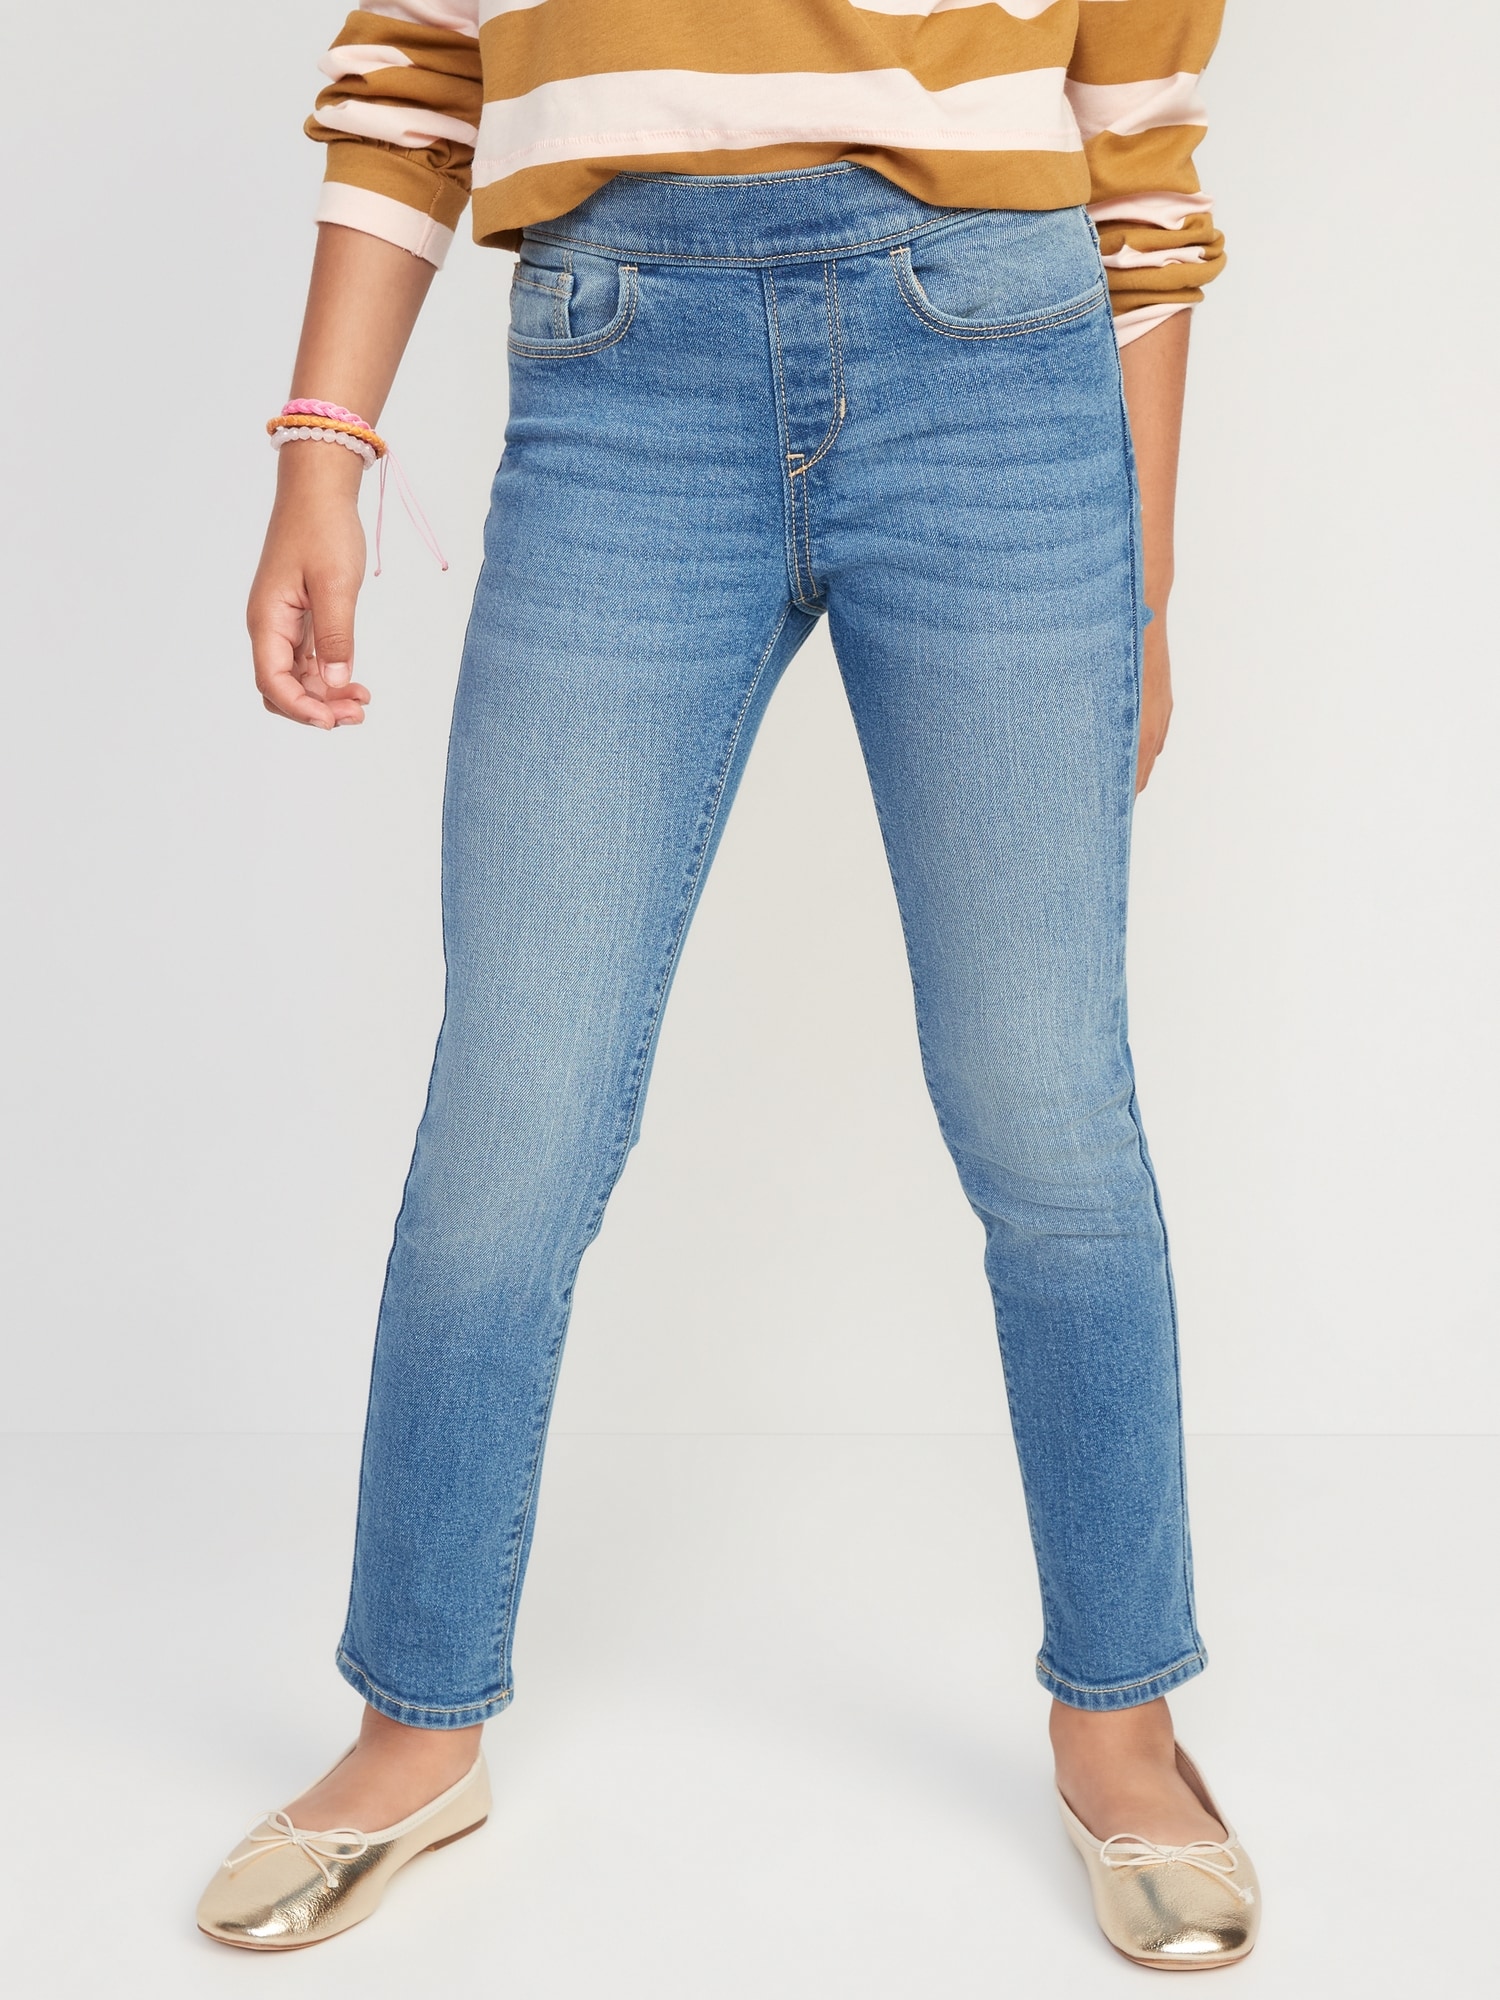 Skinny Built-In Tough Pull-On Jeans for Girls On Sale At Old Navy